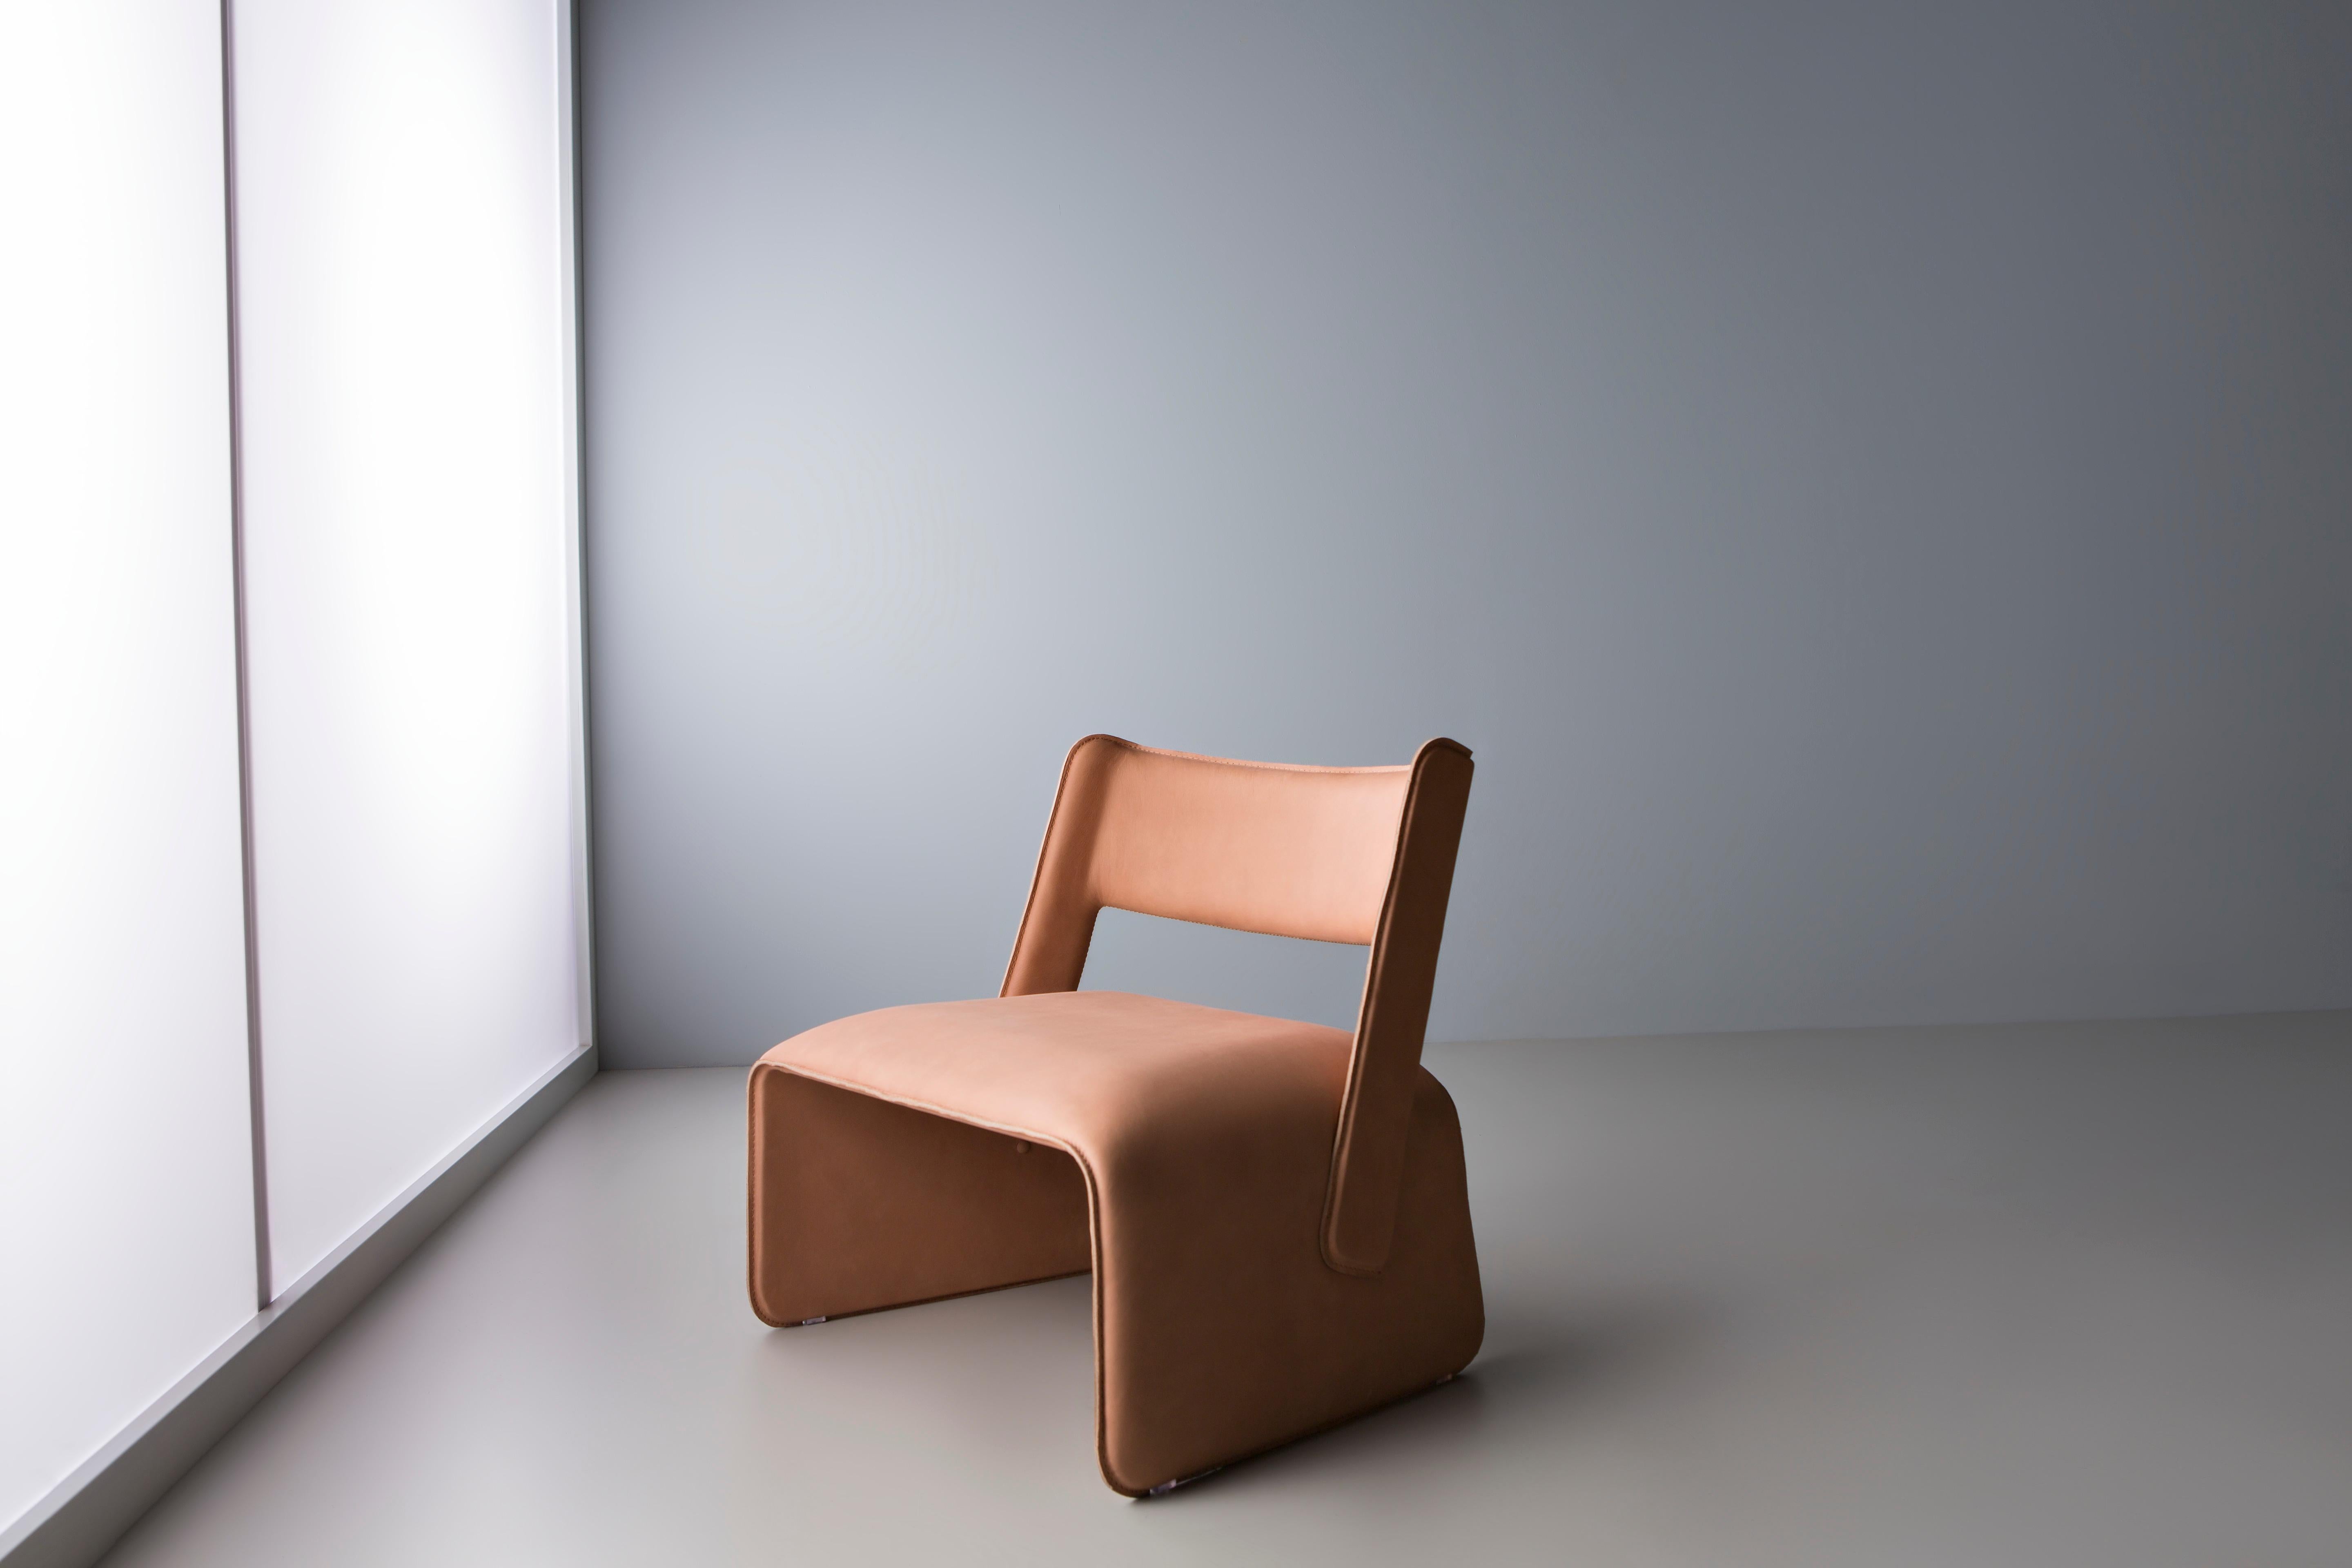 Vico Chair by Doimo Brasil
Dimensions: W 54 x D 60 x H 72 cm 
Materials: Metal, natural leather. 

With the intention of providing good taste and personality, Doimo deciphers trends and follows the evolution of man and his space. To this end, it